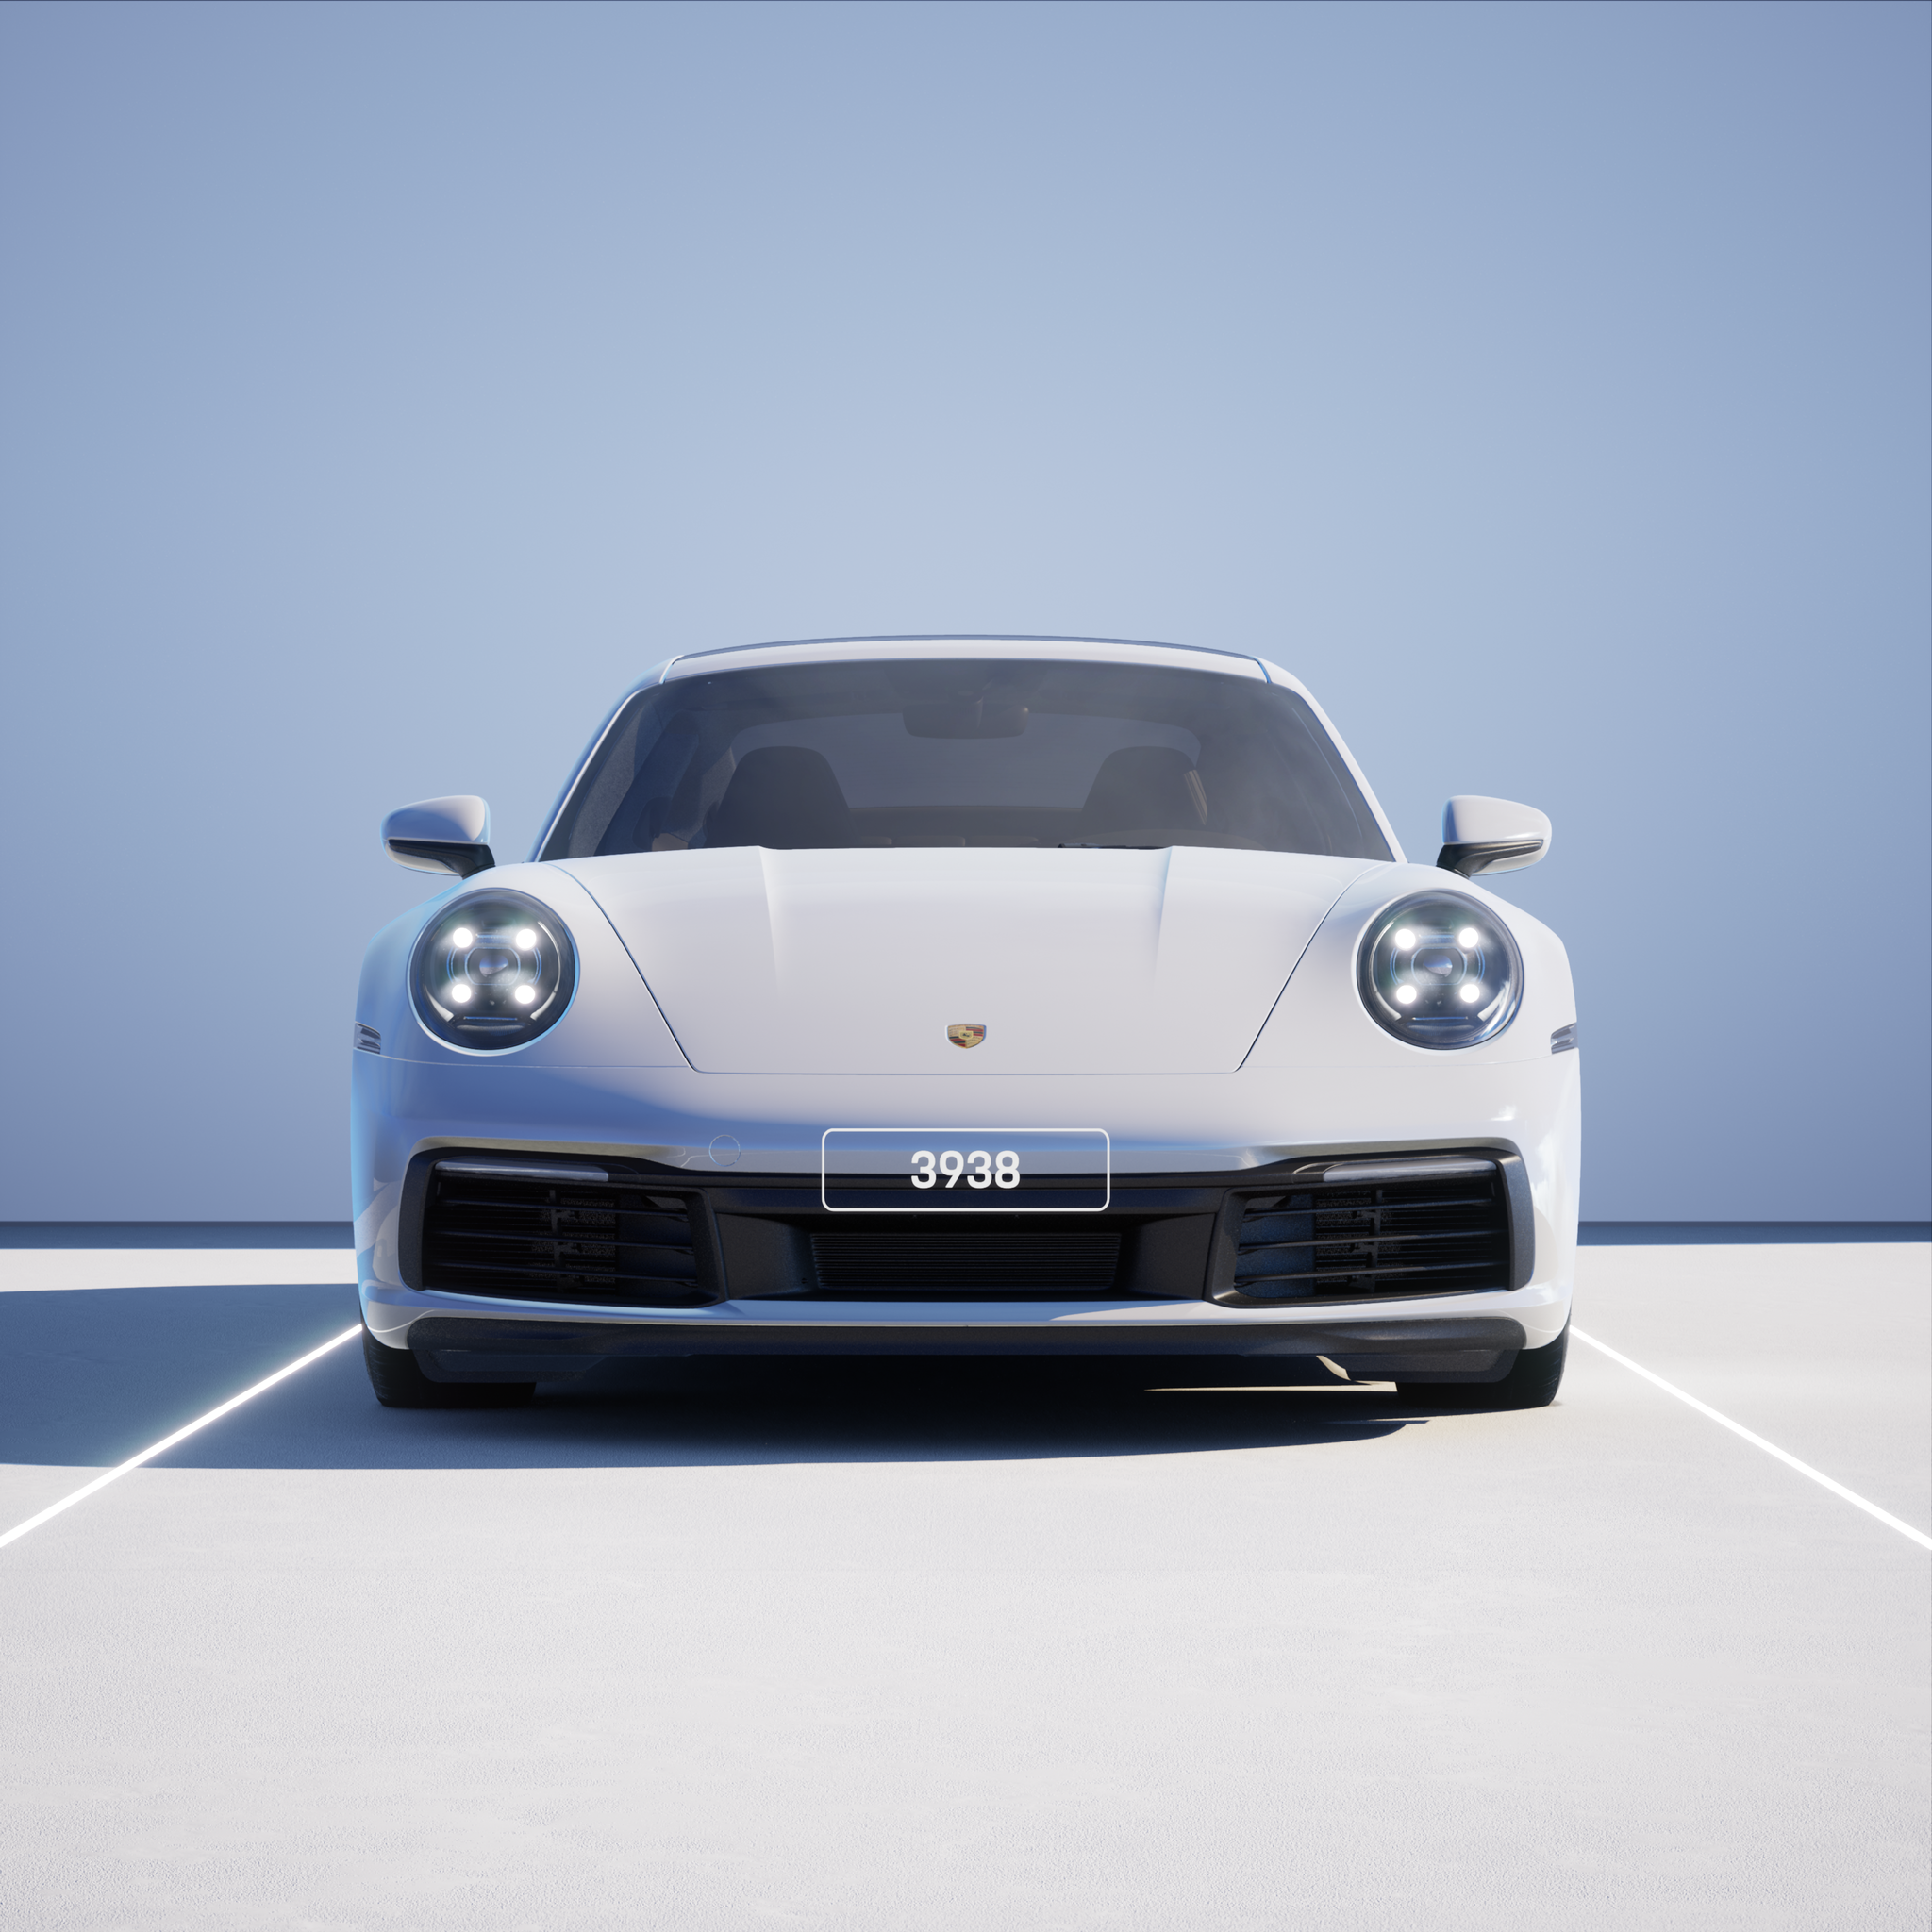 The PORSCHΞ 911 3938 image in phase